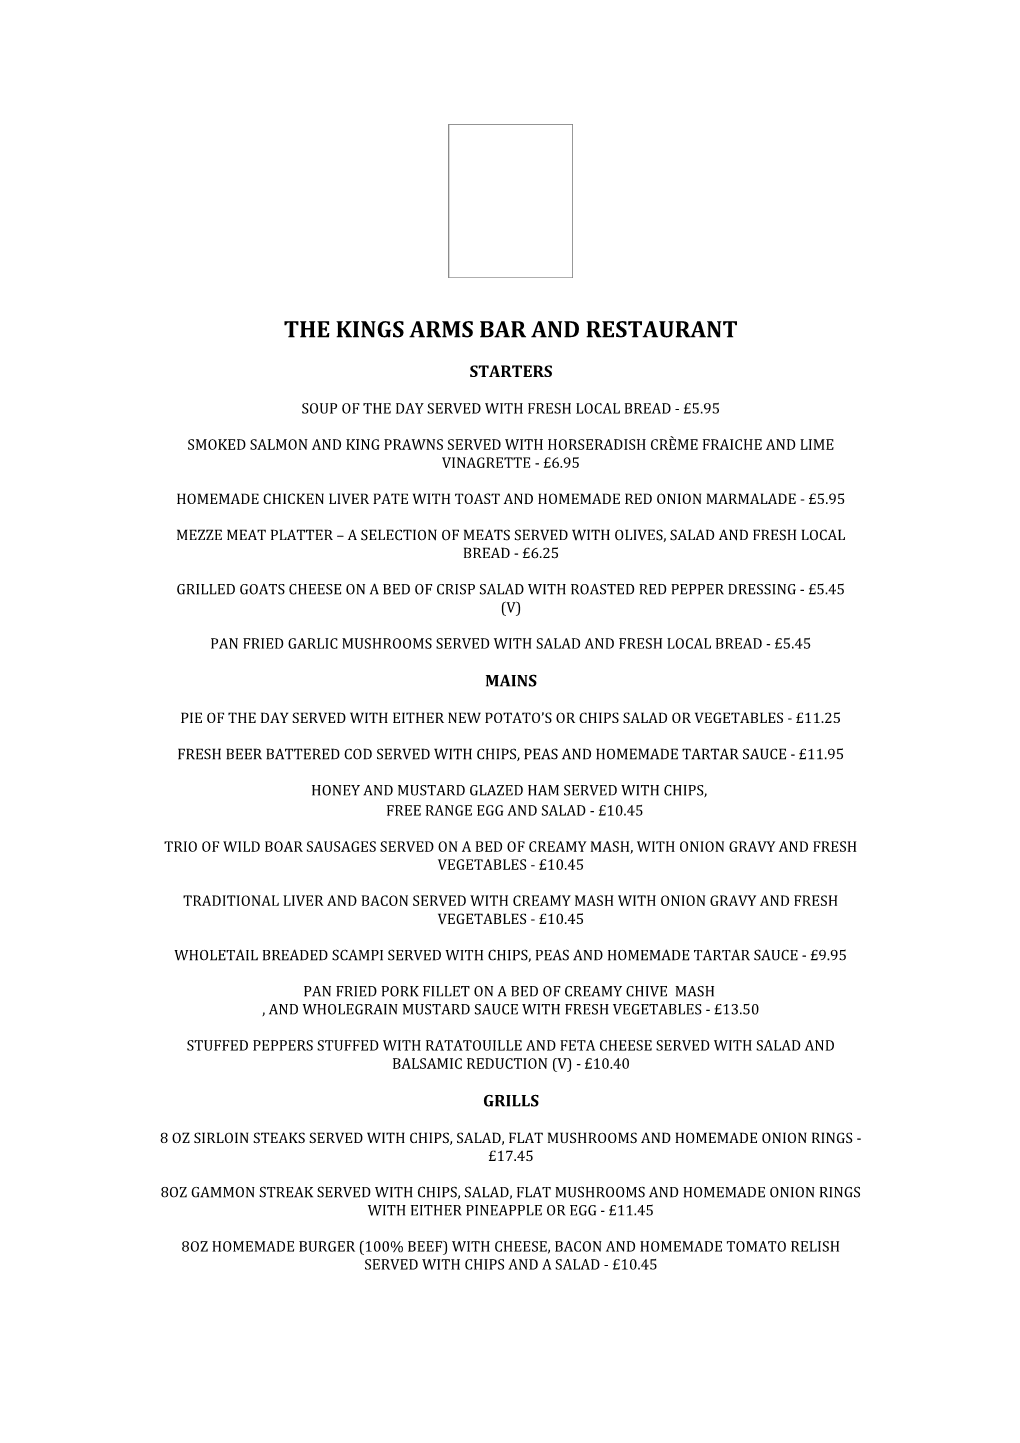 The Kings Arms BAR and Restaurant